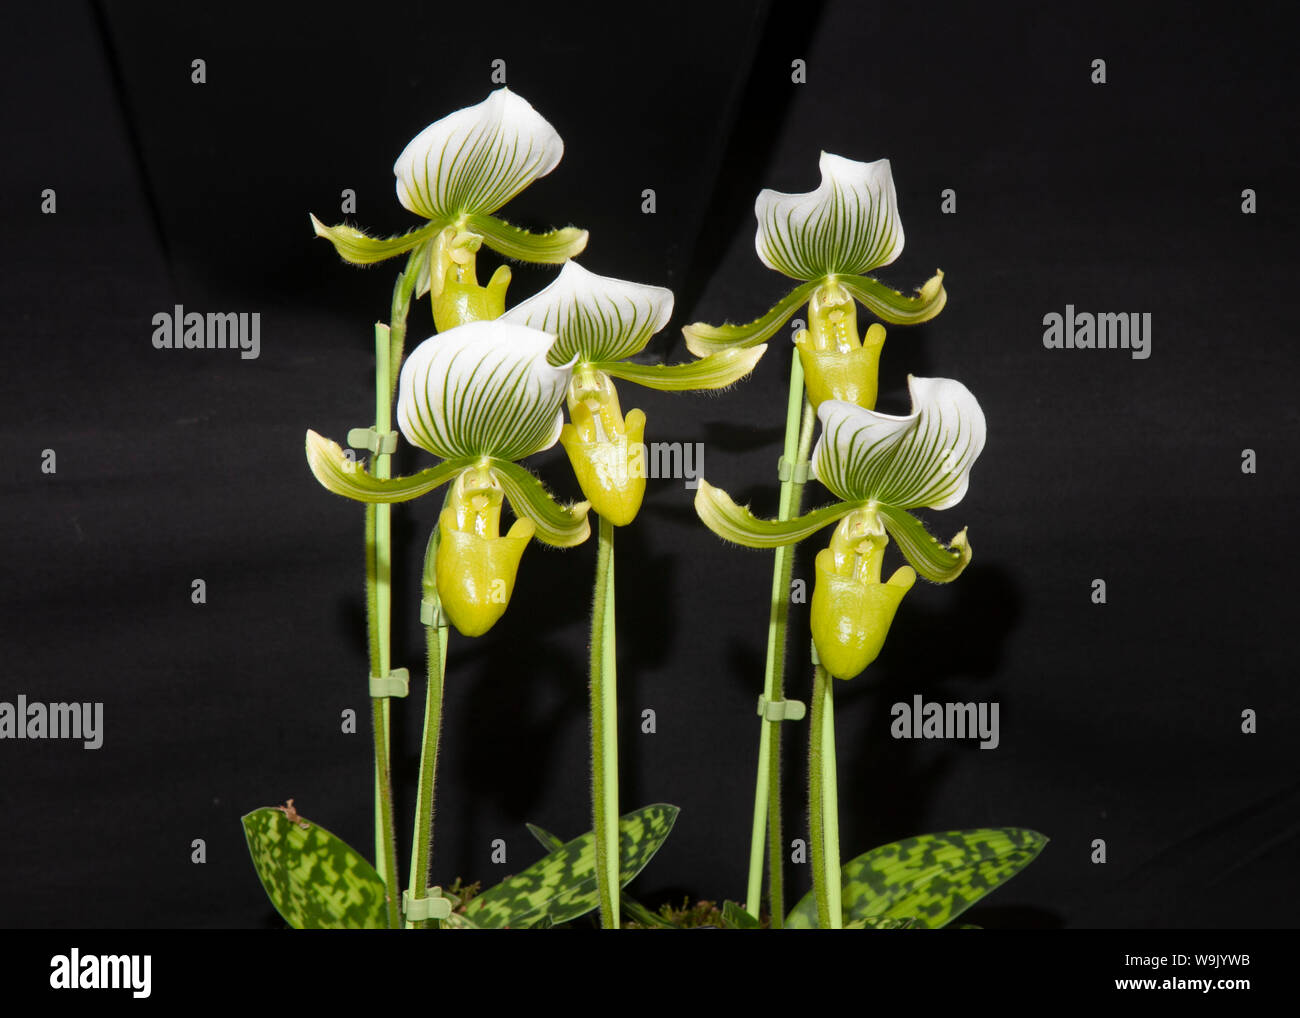 Orchids phalaenopsis;Paphiopedilum 'Maudiae Femma' Common name(s): Lady Slipper, Slipper Orchid Synonyme on display at Southport Flower Show, 2019. Stock Photo